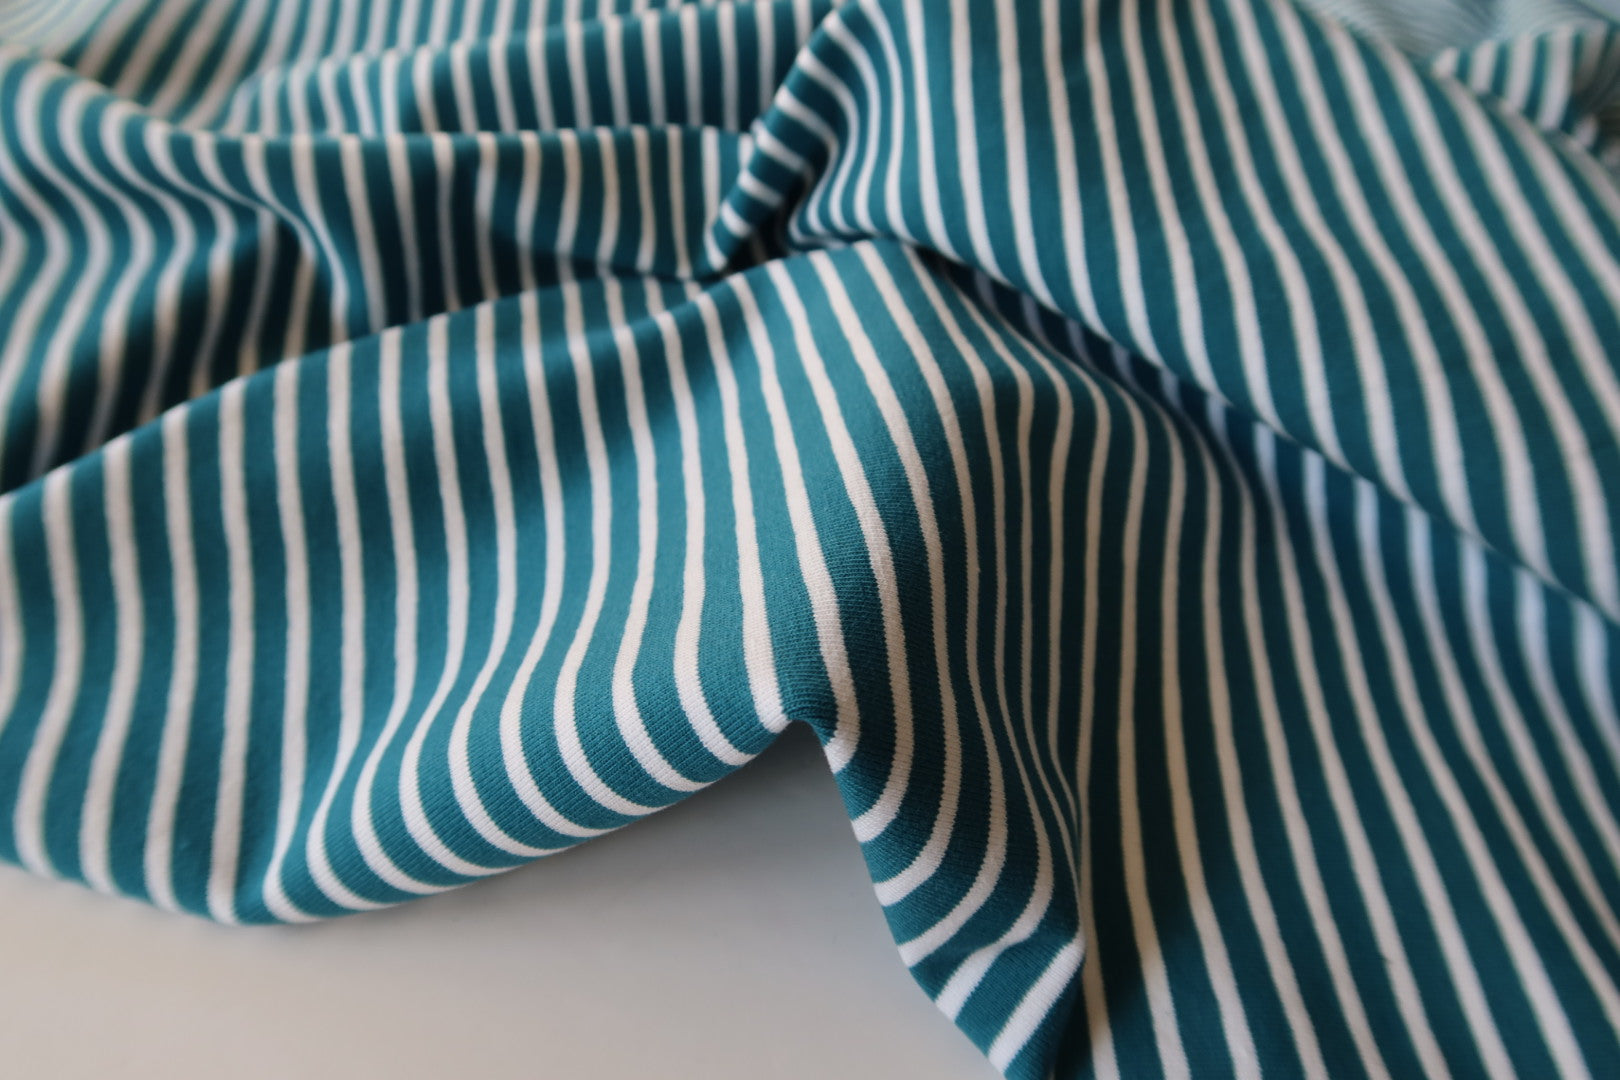 Teal with White Small Stripe Cotton Jersey Fabric